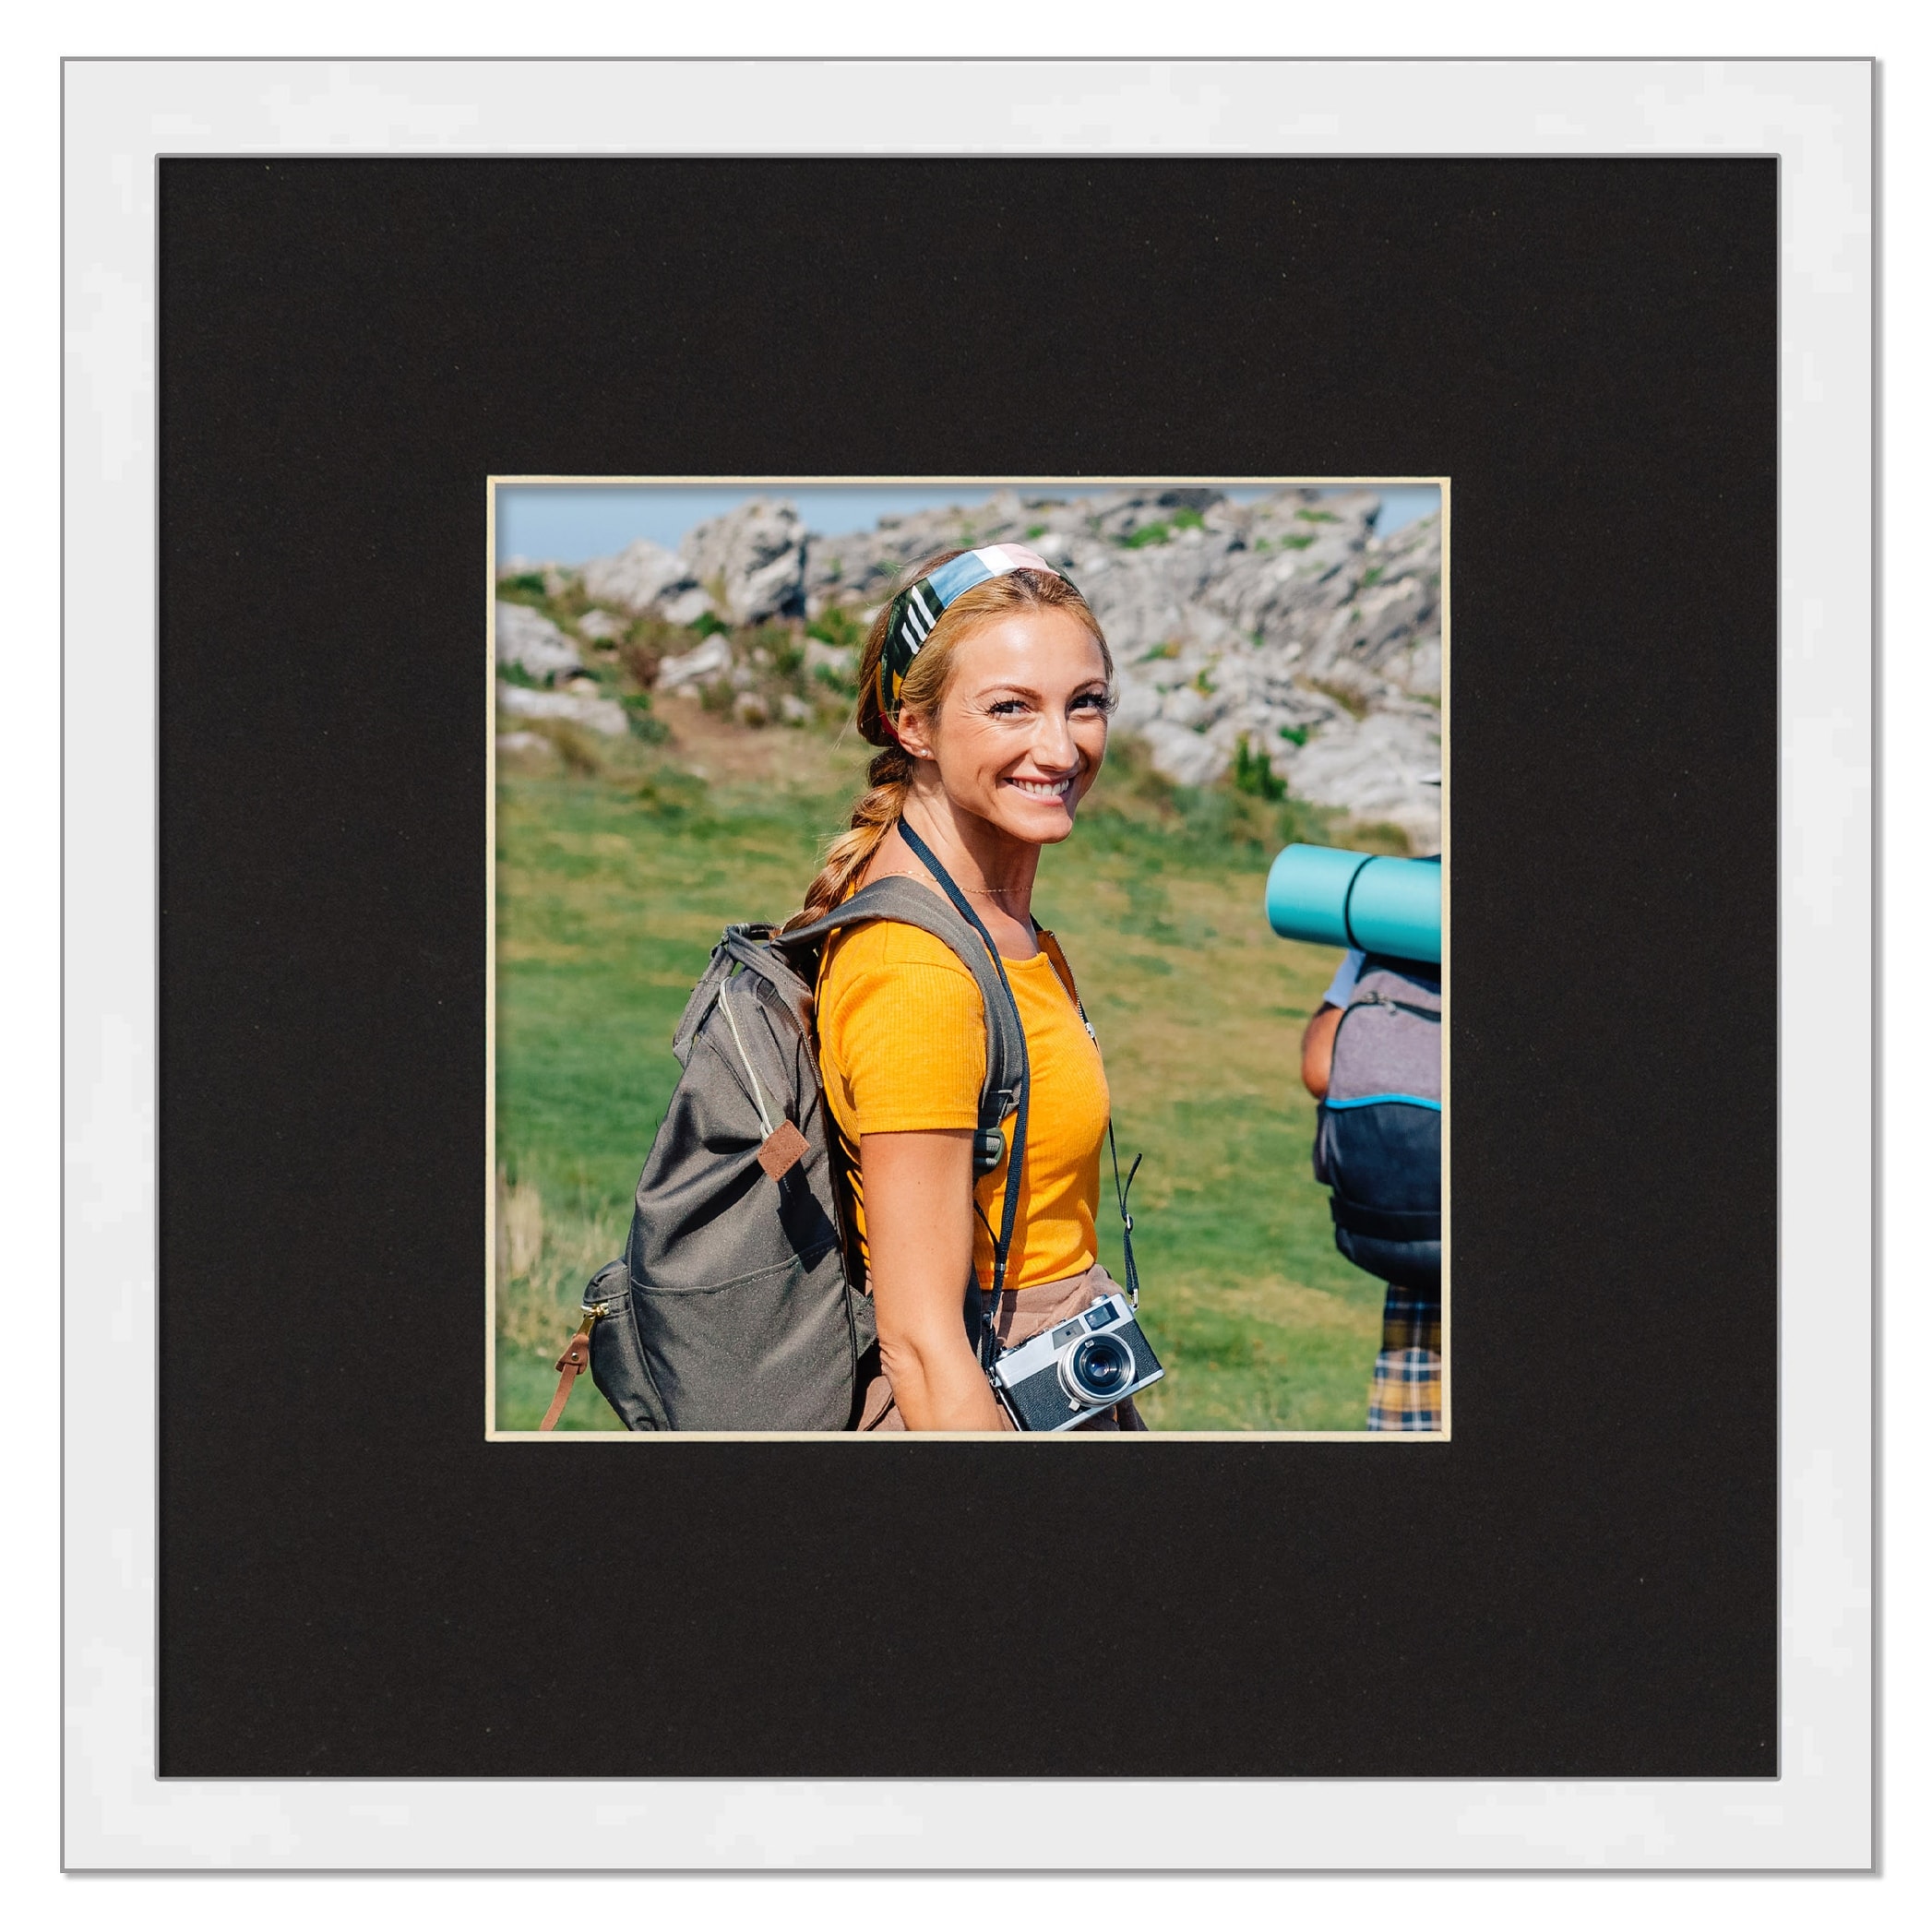 8x8 Frame with Mat - White 11x11 Frame Wood Made to Display Print or Poster  Measuring 8 x 8 Inches with Black Photo Mat - On Sale - Bed Bath & Beyond -  38554300